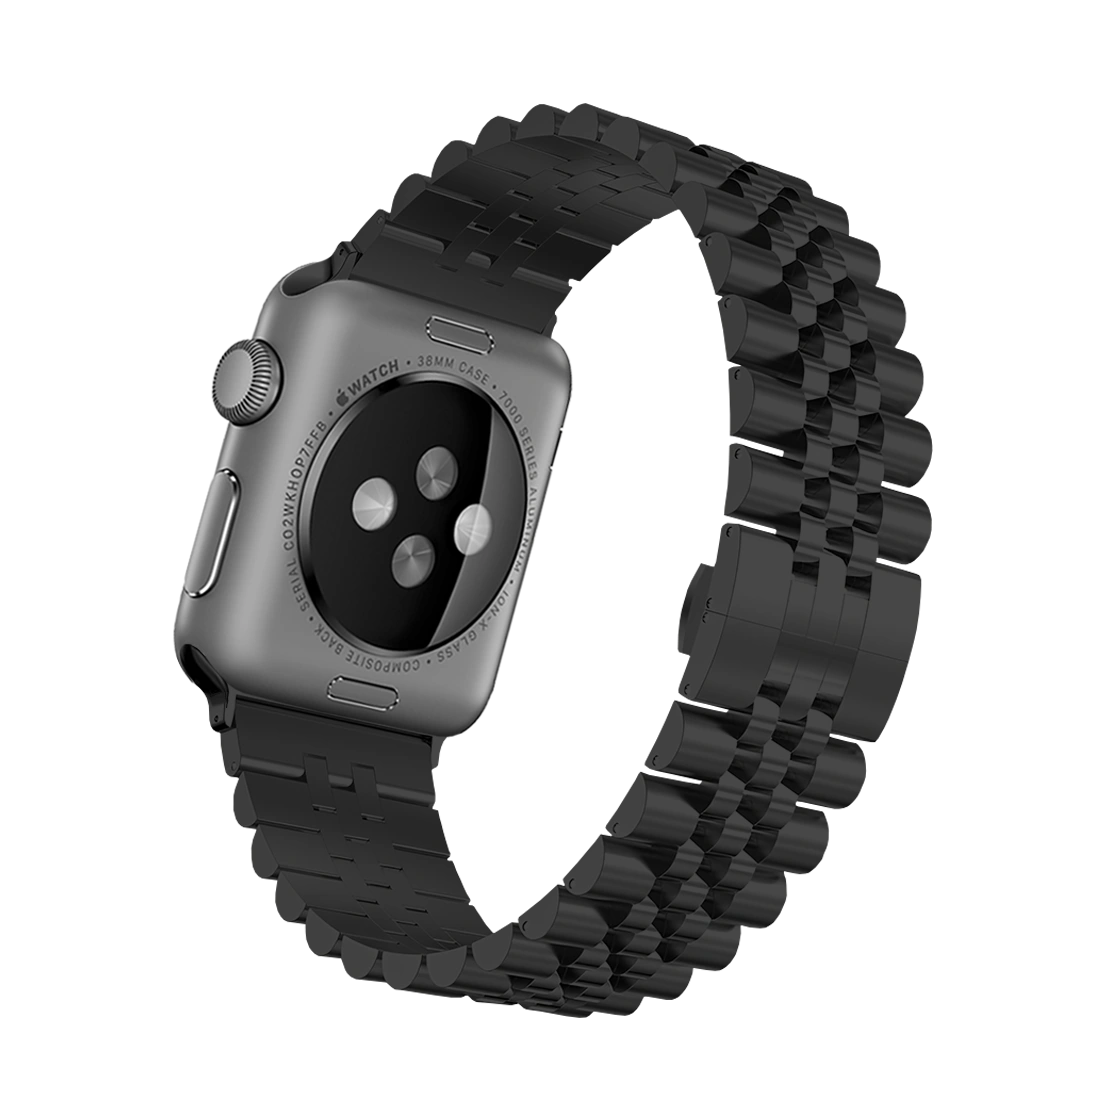 Apple Watch Ultra Titanium Case with White Ocean Band